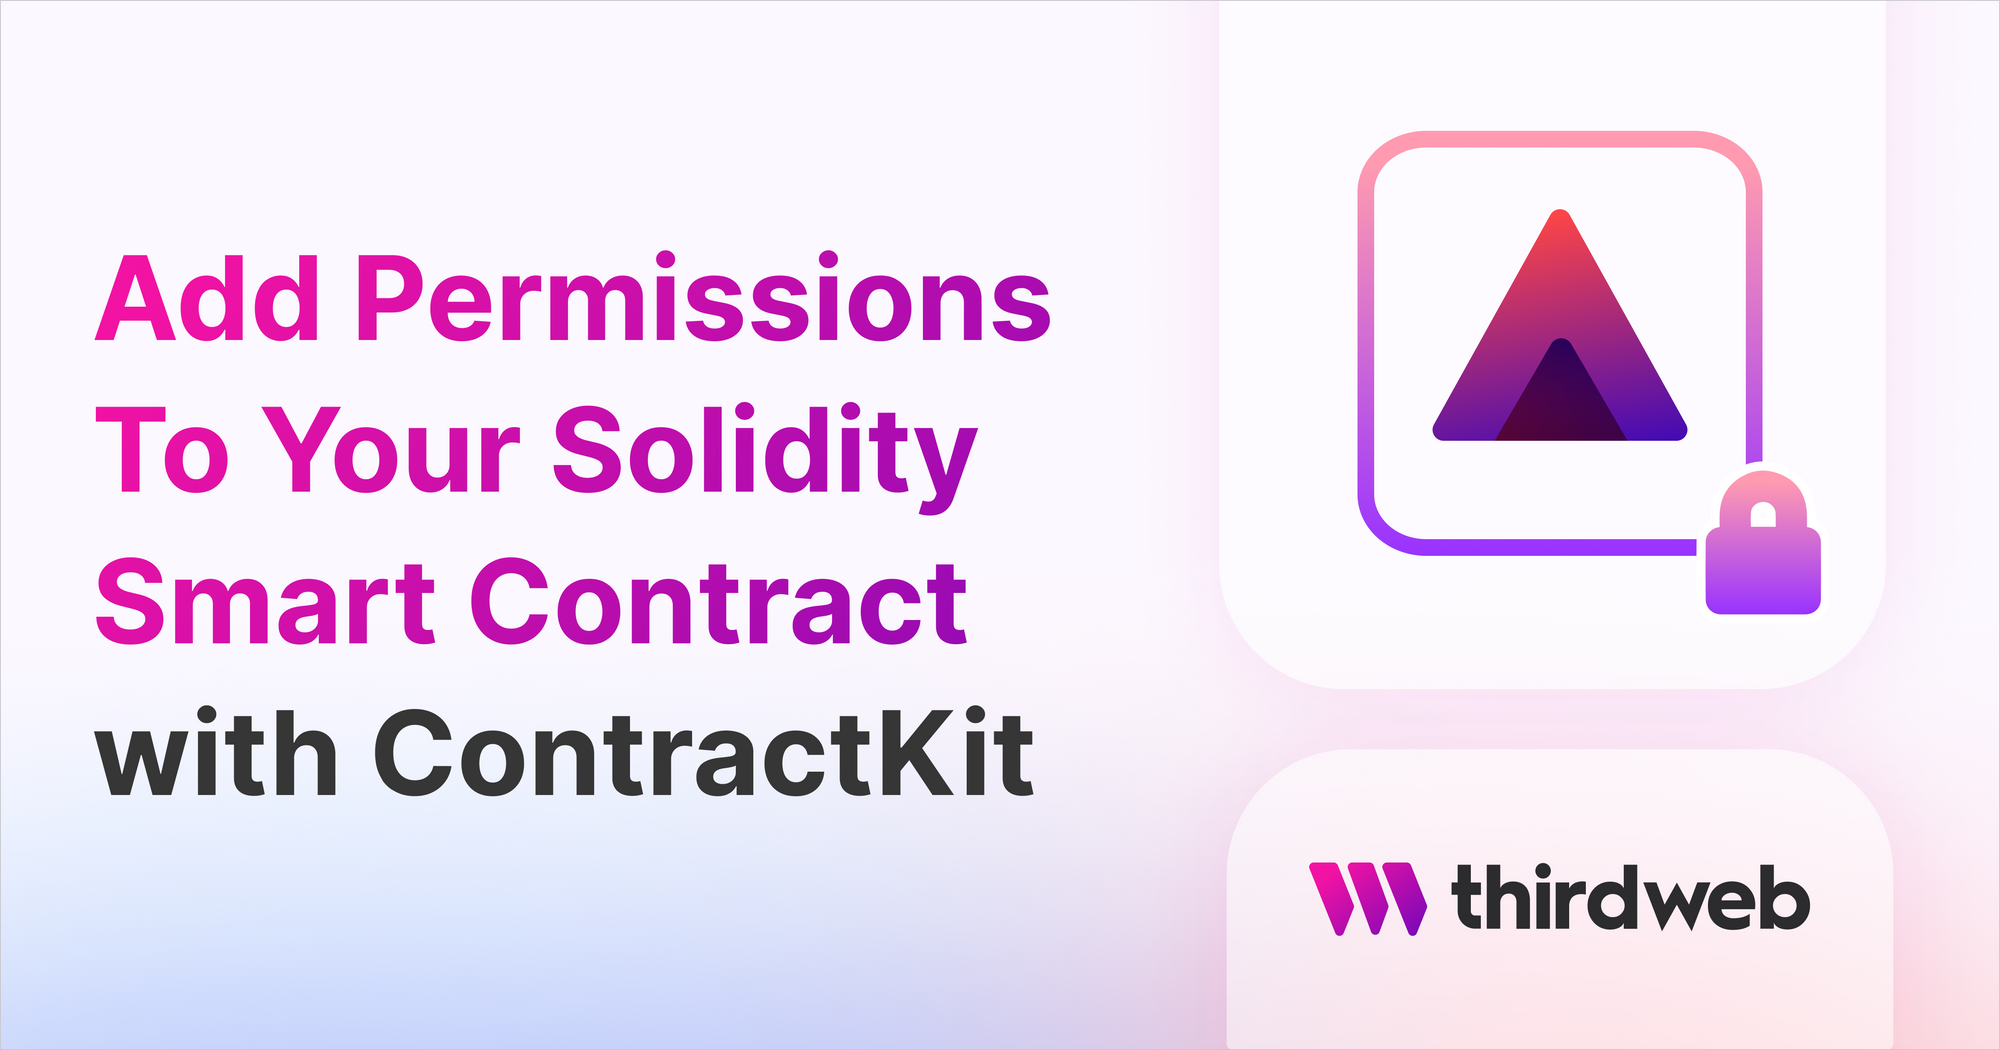 How to Add Permissions to Your Smart Contract in Solidity